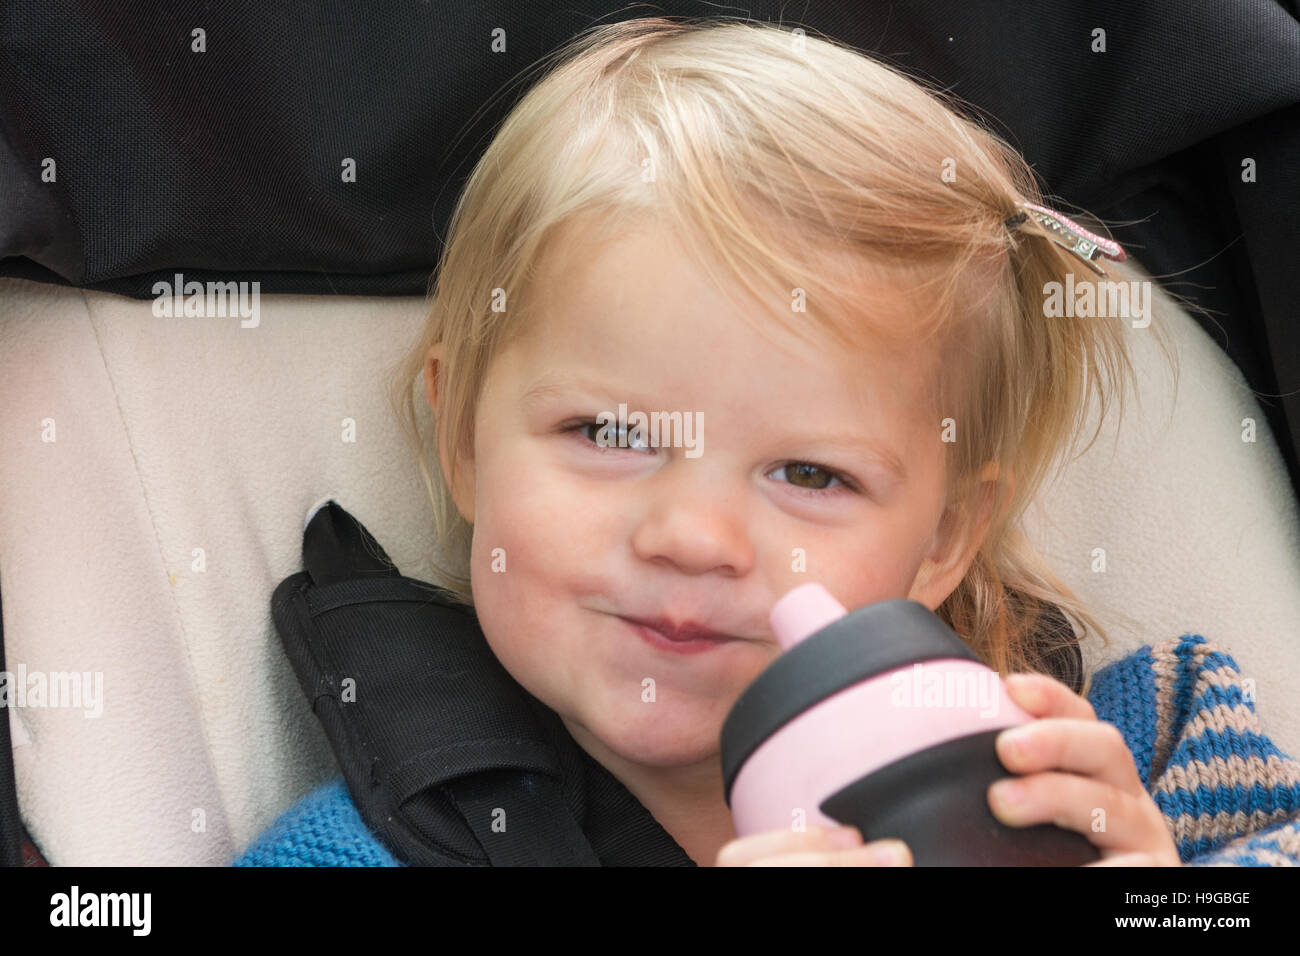 2 year old girl with blond hair with pink and black water bottle and cheeky grin Stock Photo